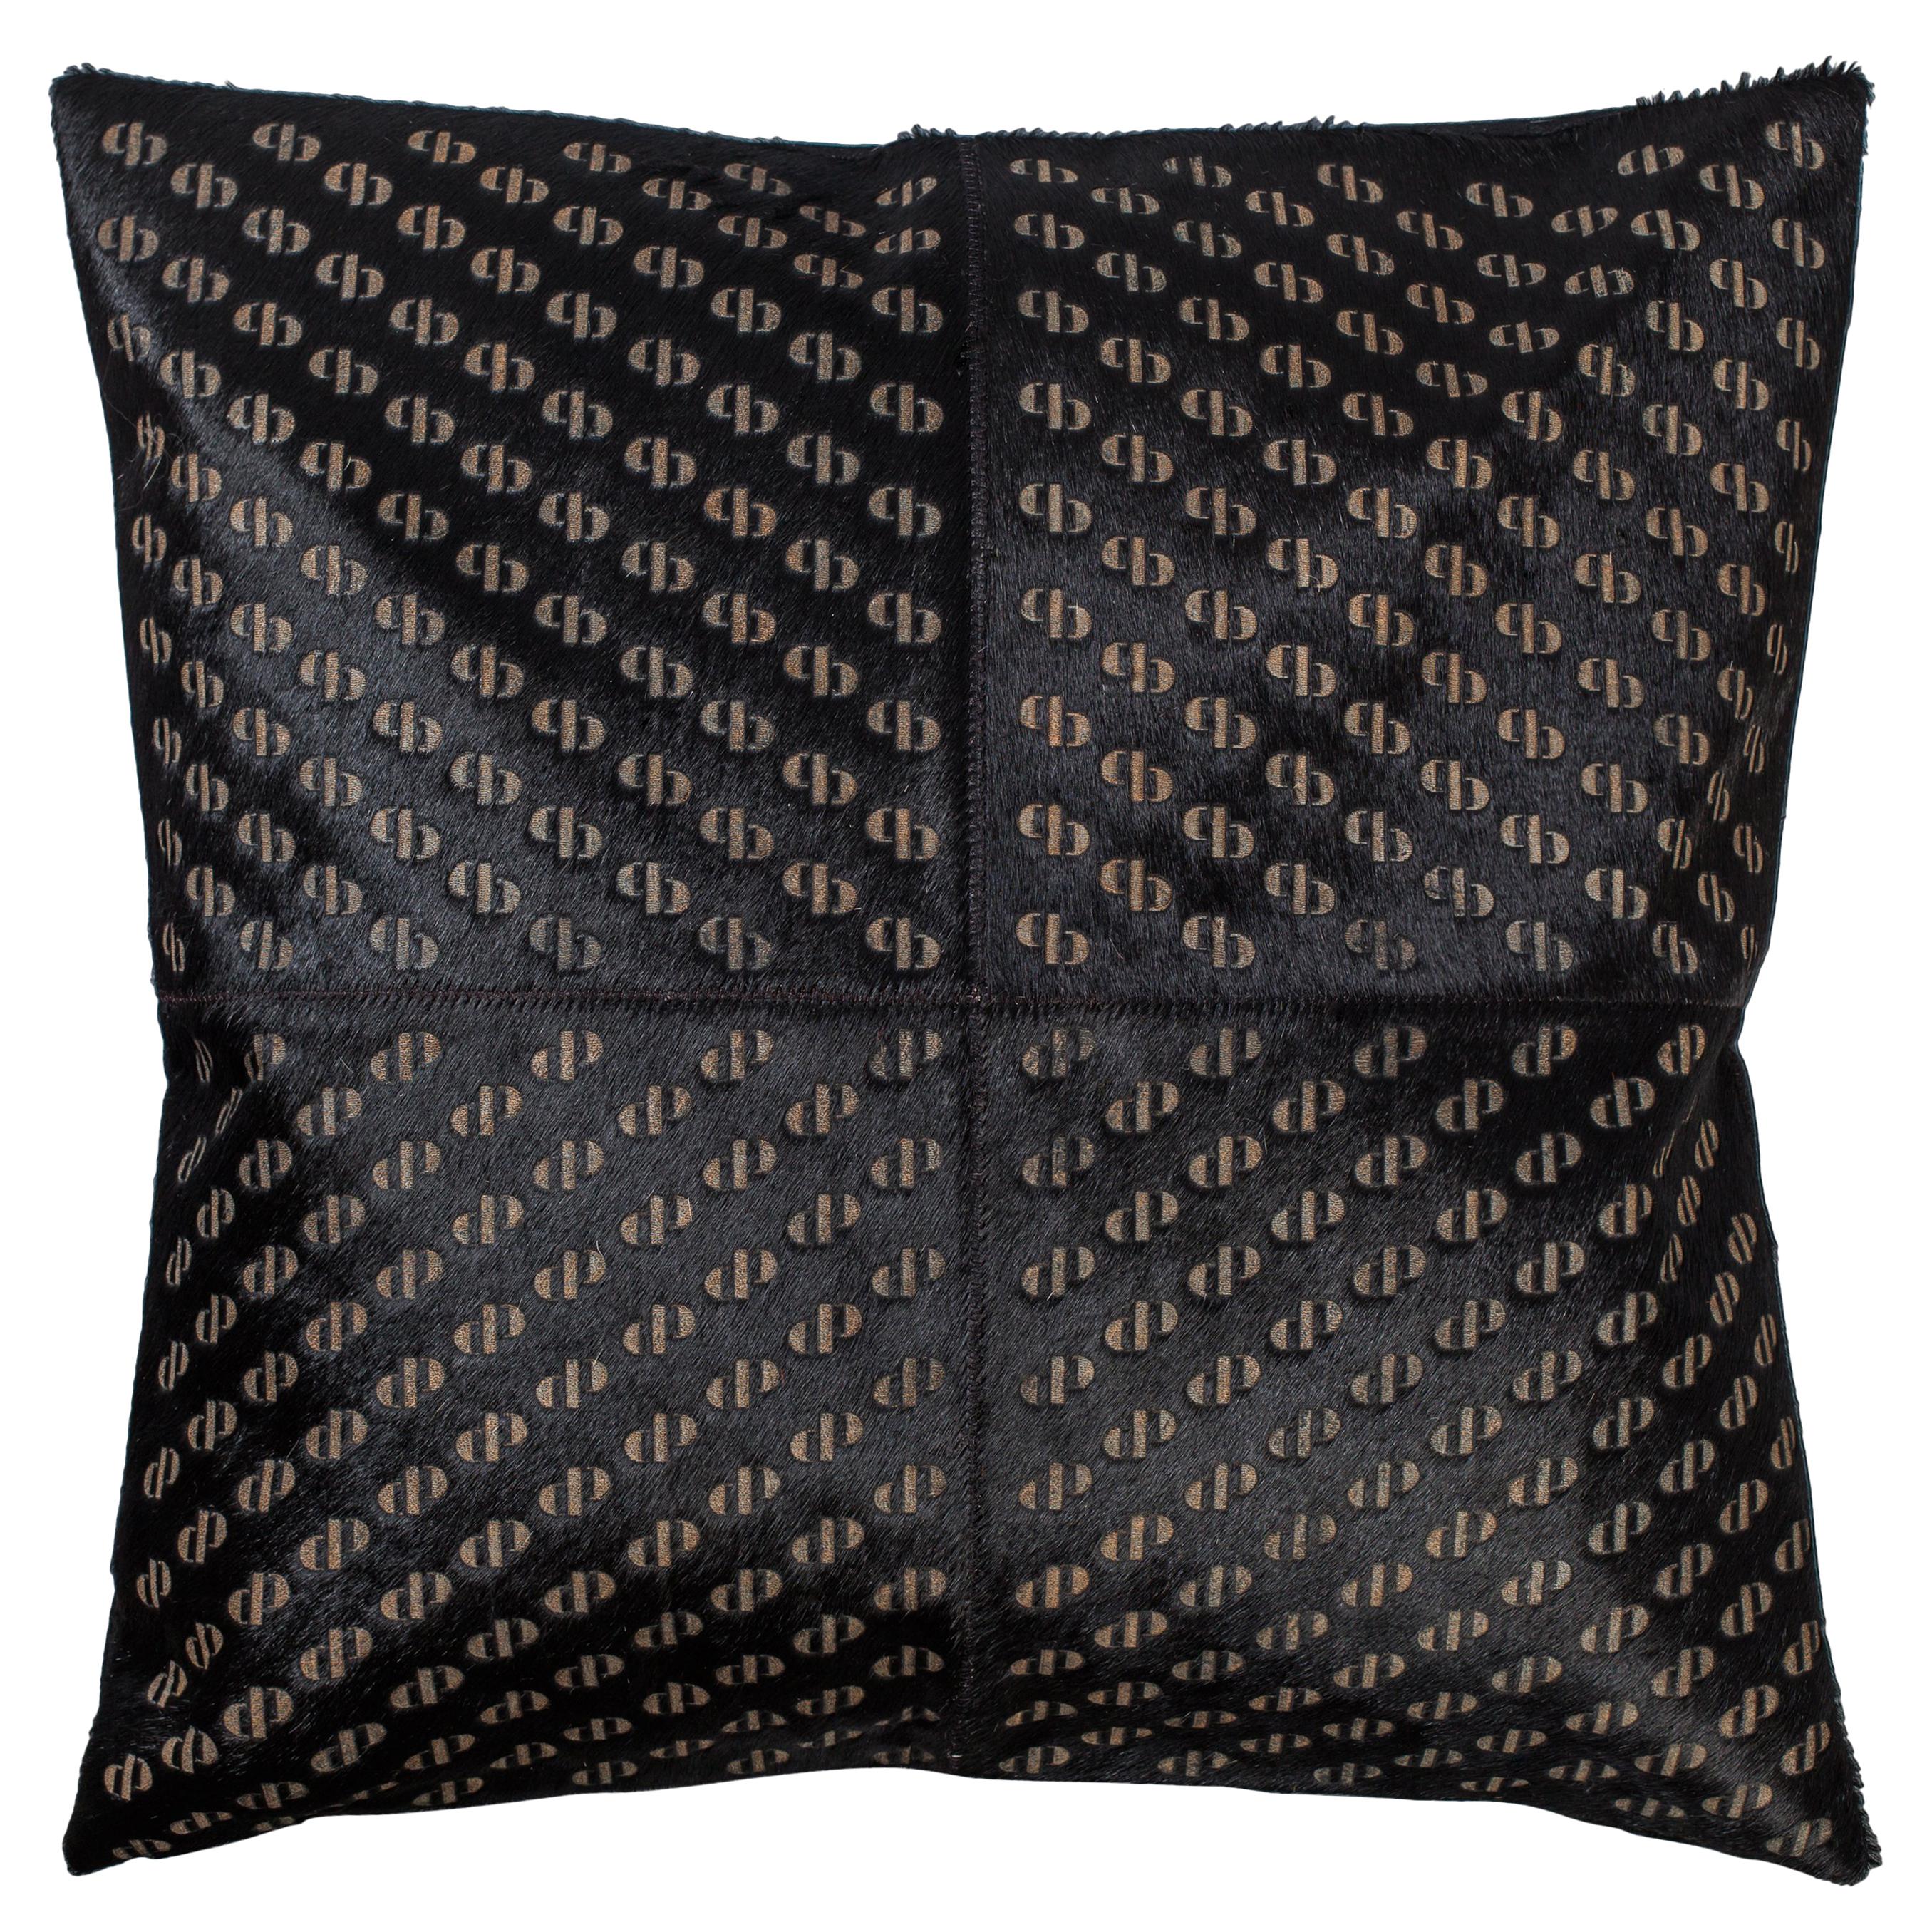 Patterned Cowhide Cushions Pitch Black and Leather Zip Tassels